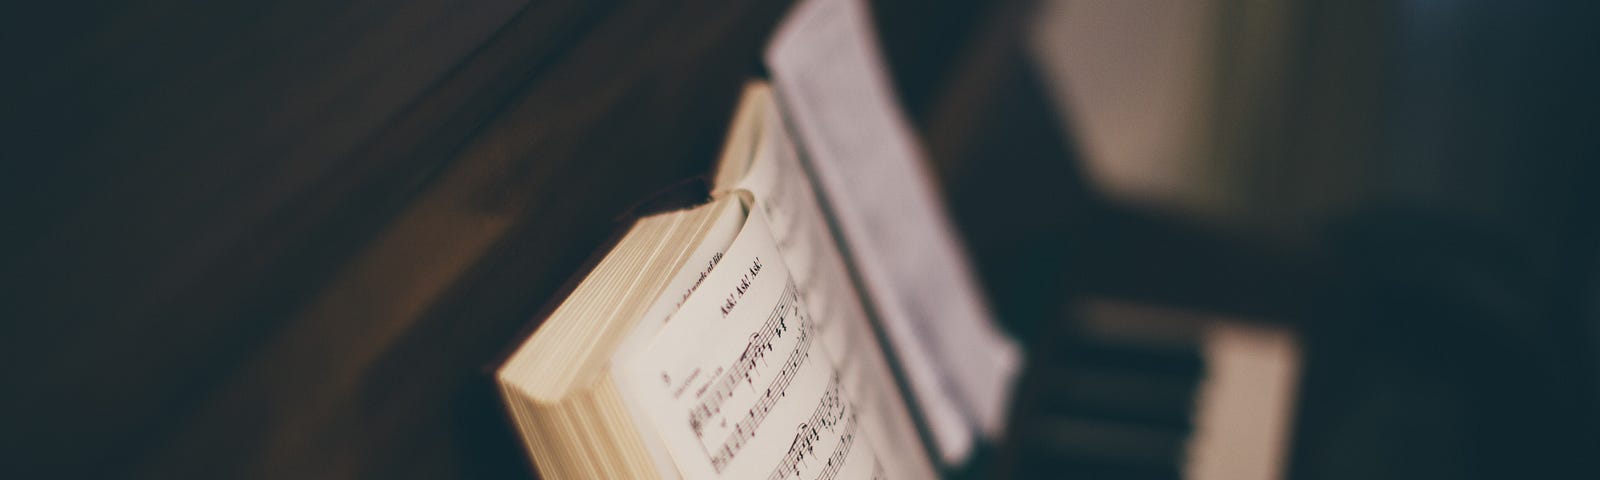 Opened music book on top of a piano